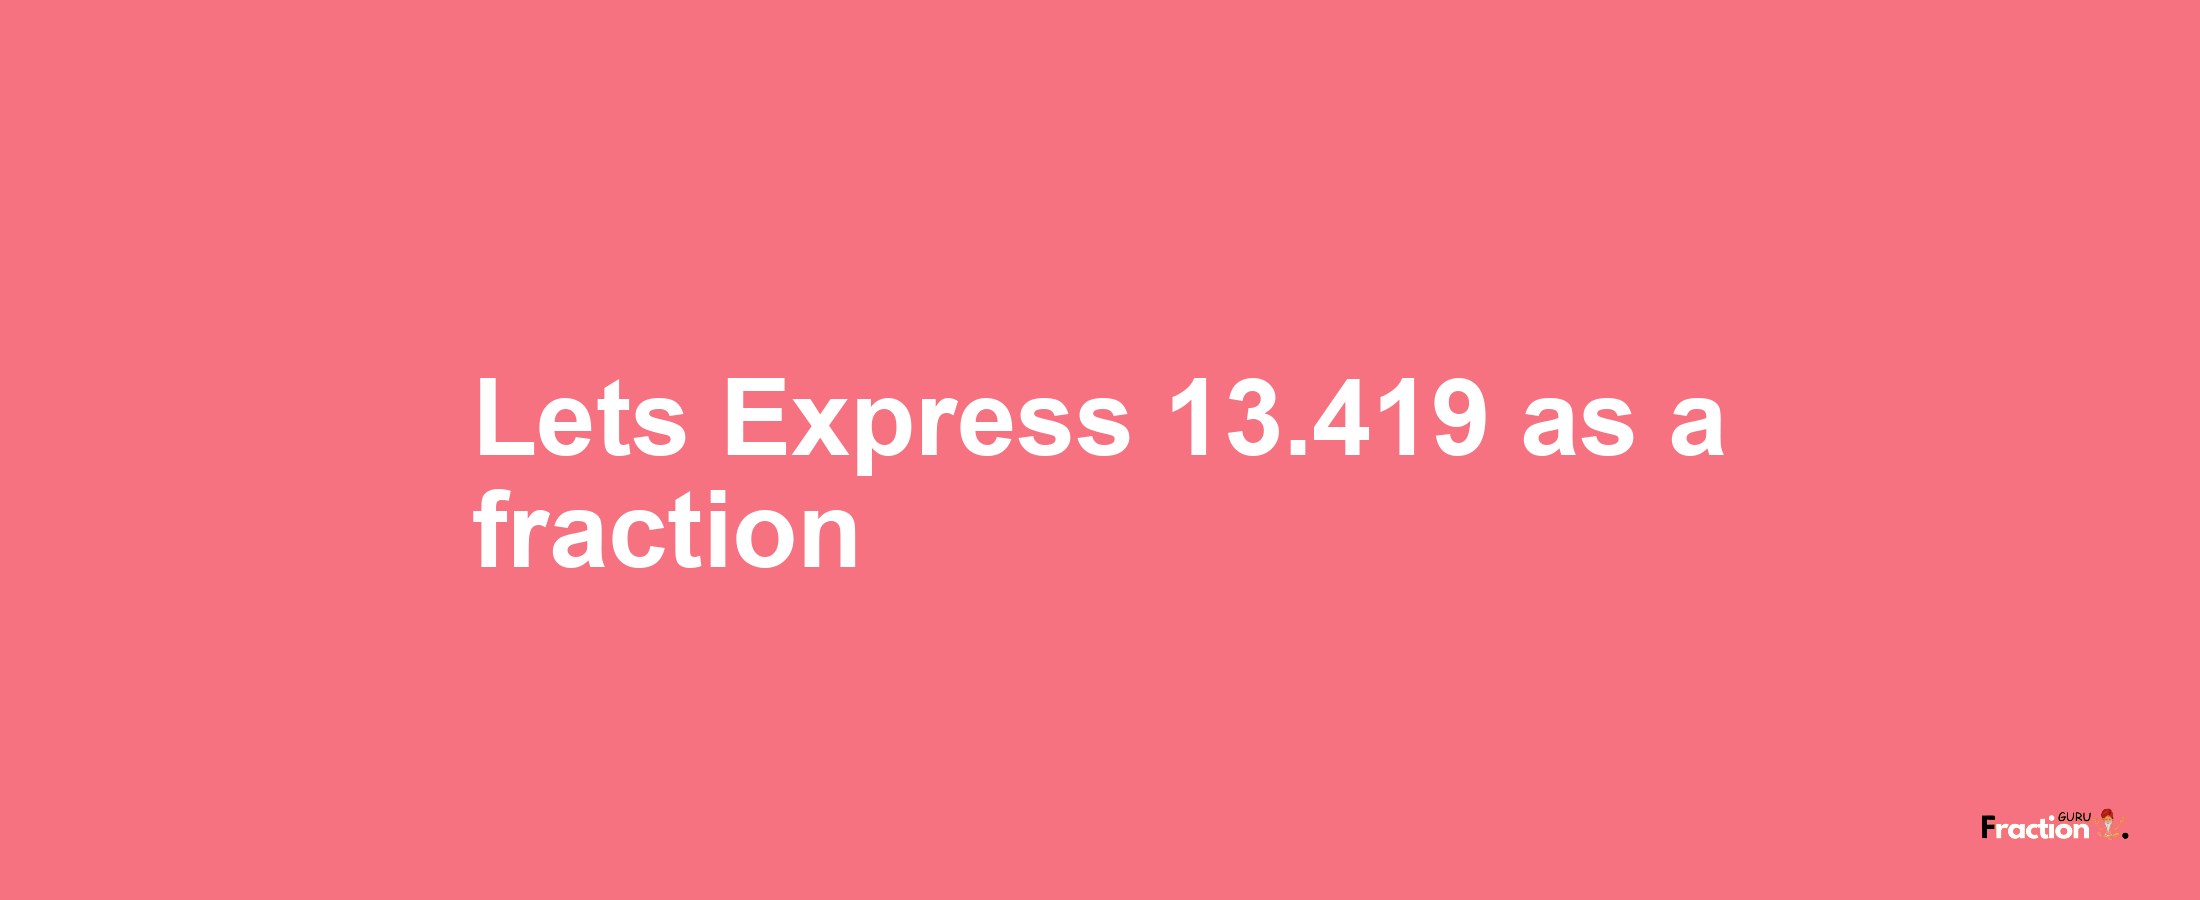 Lets Express 13.419 as afraction